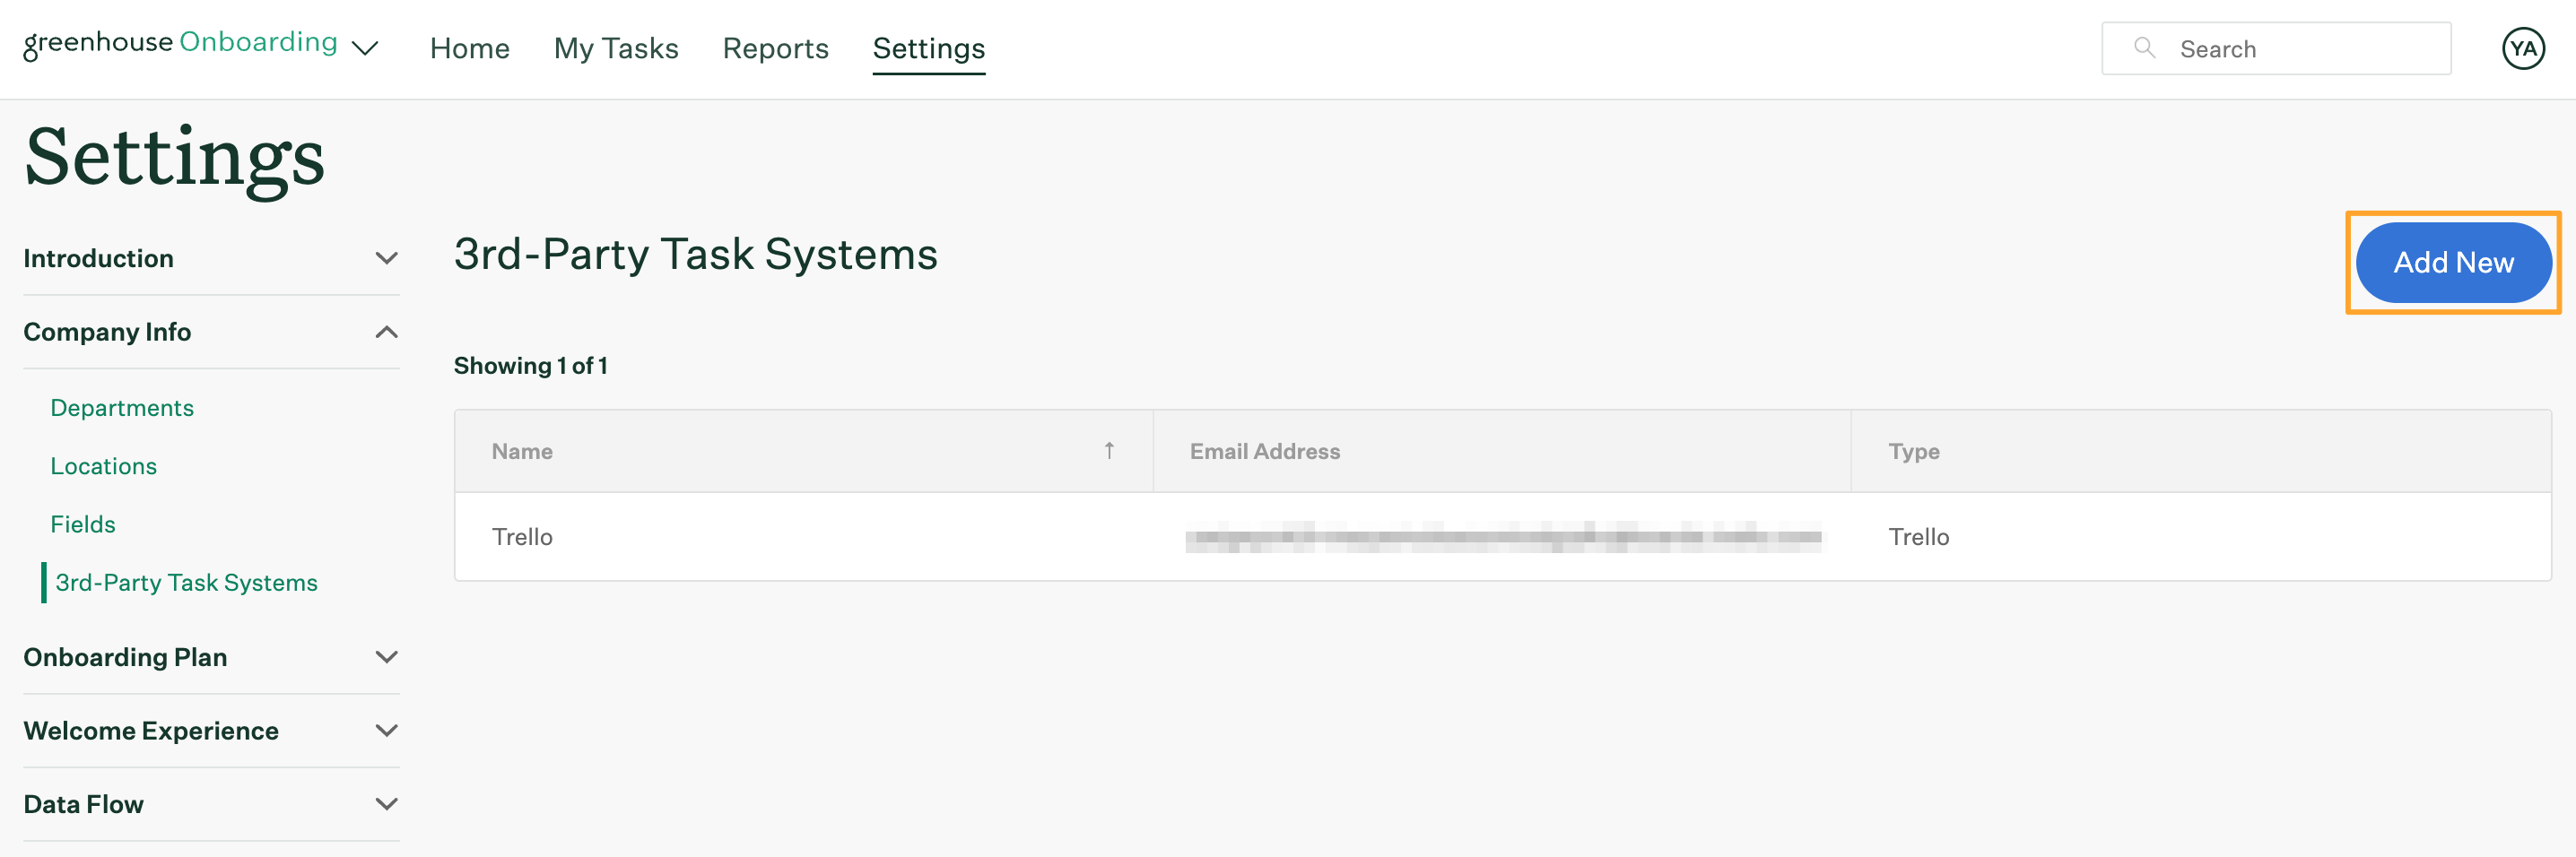 Add New button highlighted on 3rd Party Task Systems page in Greenhouse Onboarding Settings